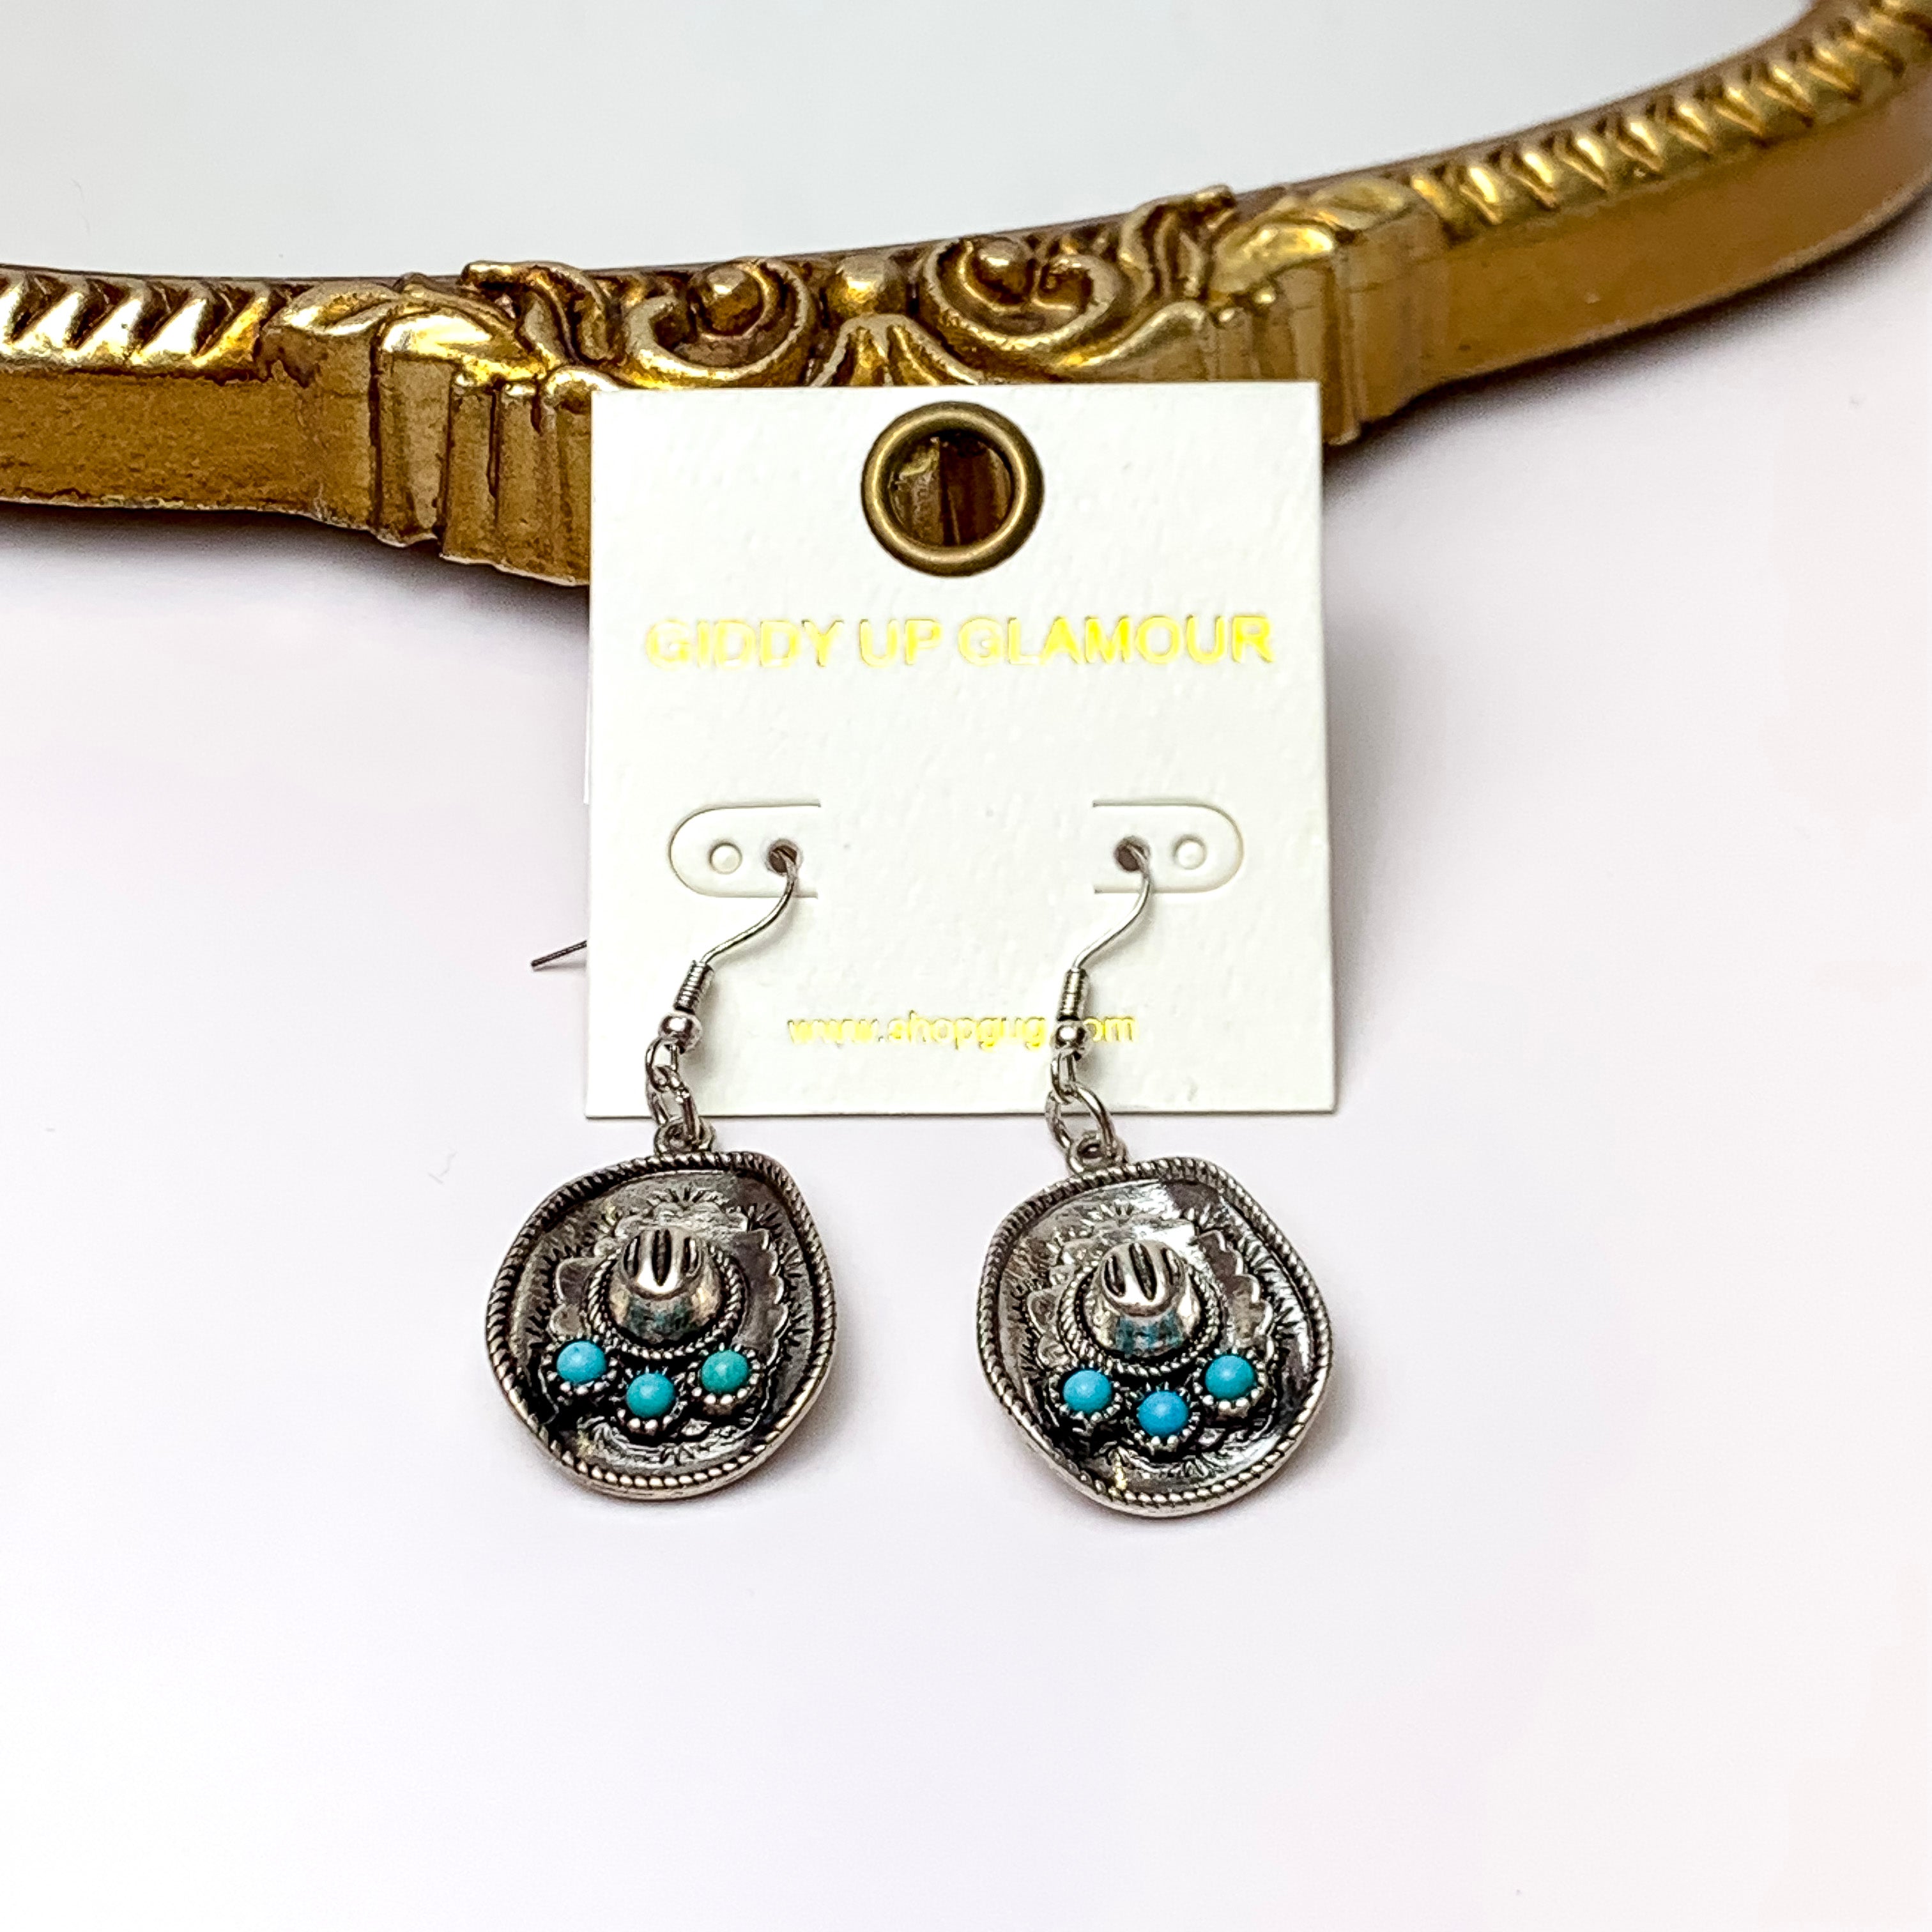 Cowboy Hat Earrings in Silver Tone and Turquoise Blue - Giddy Up Glamour Boutique